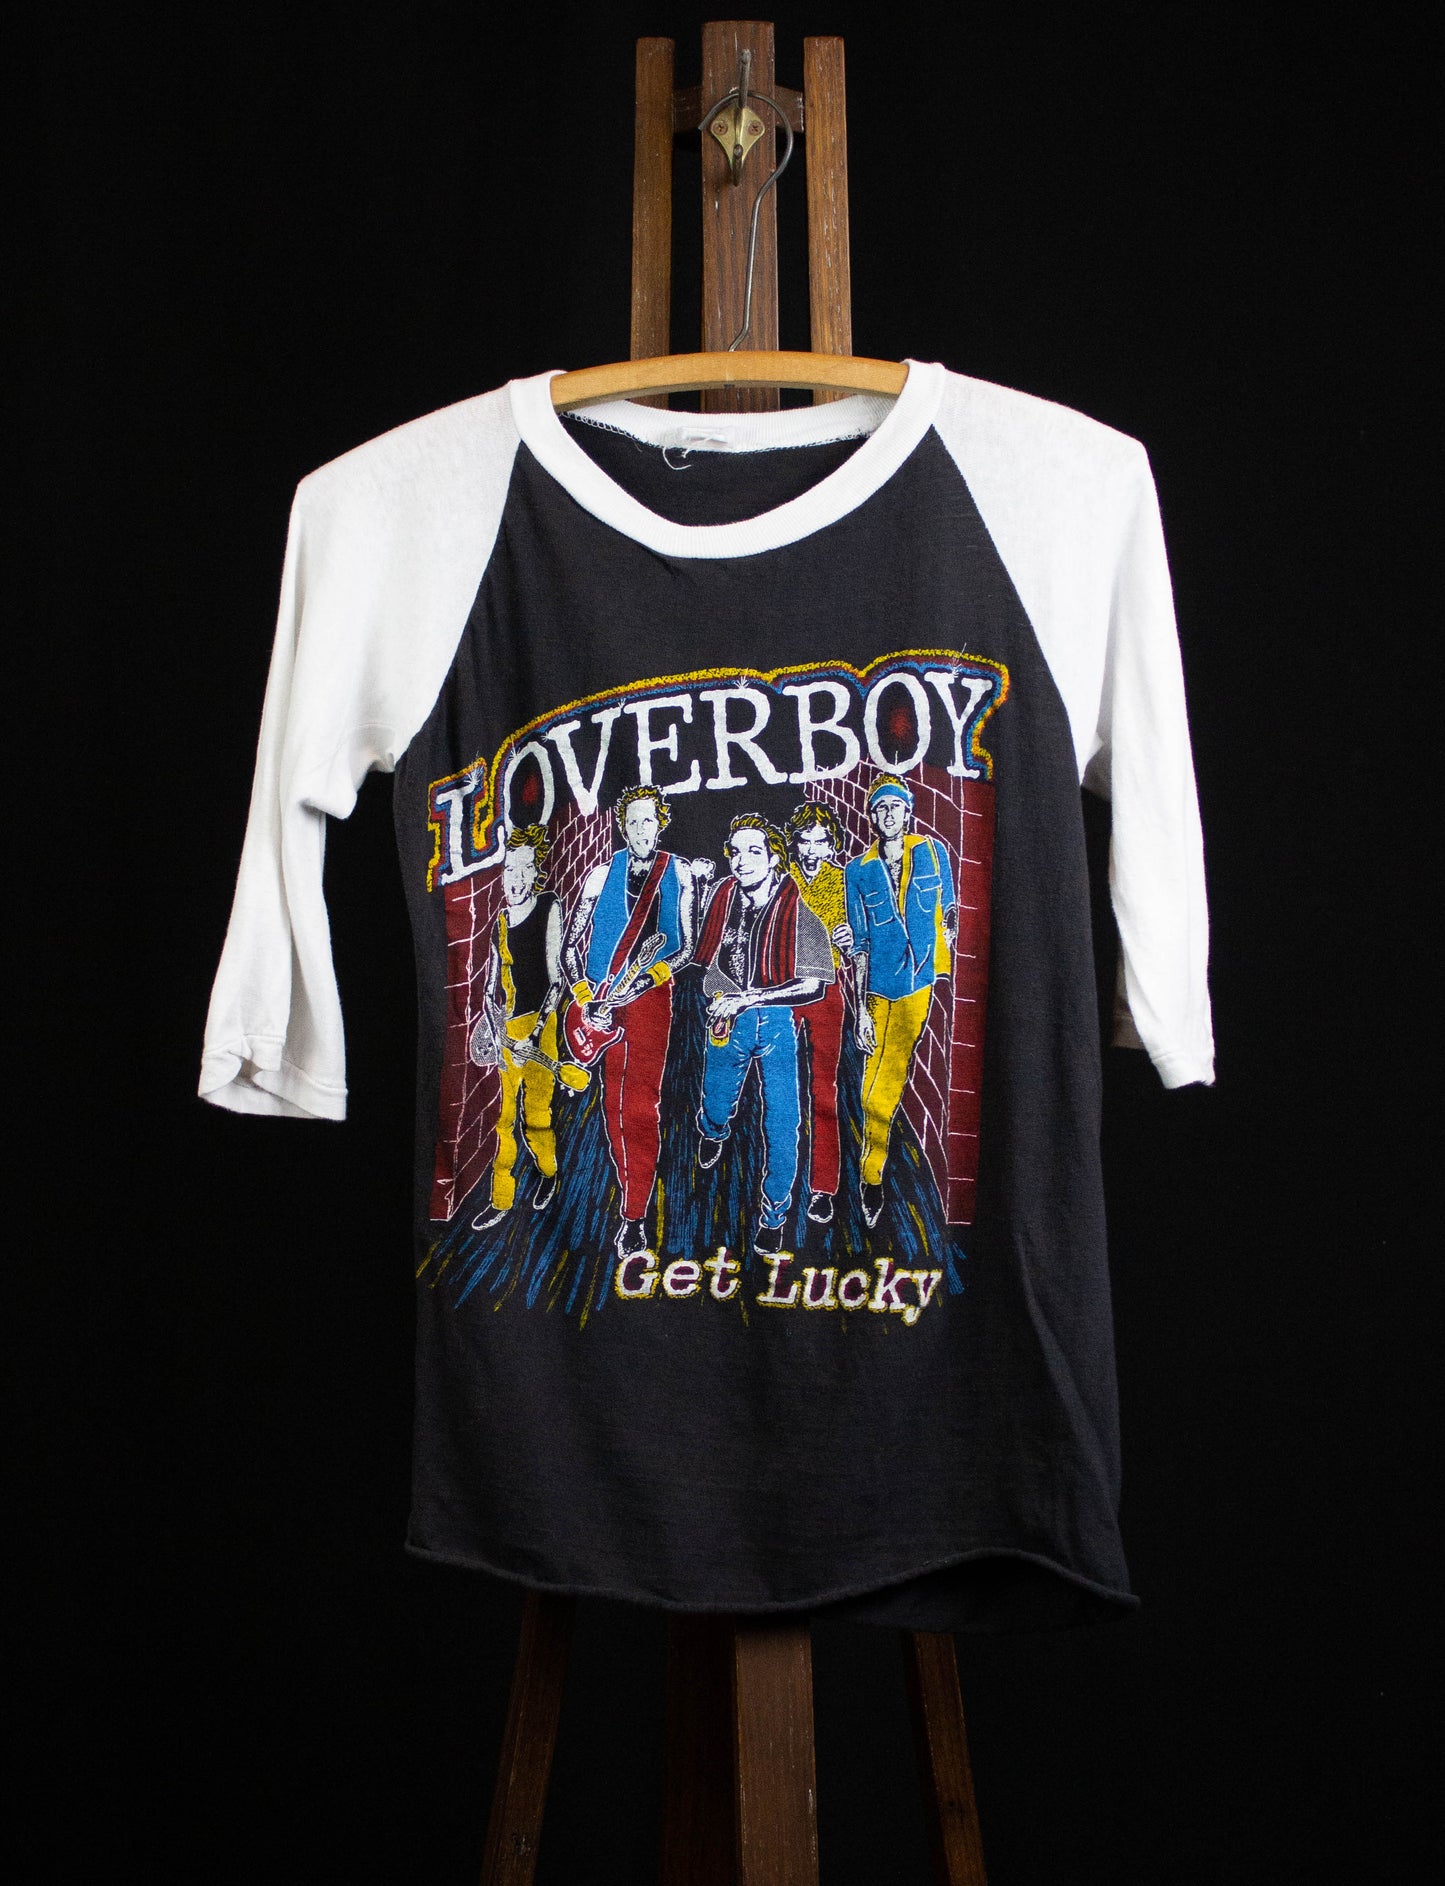 Vintage Loverboy Get Lucky Black and White Raglan Small